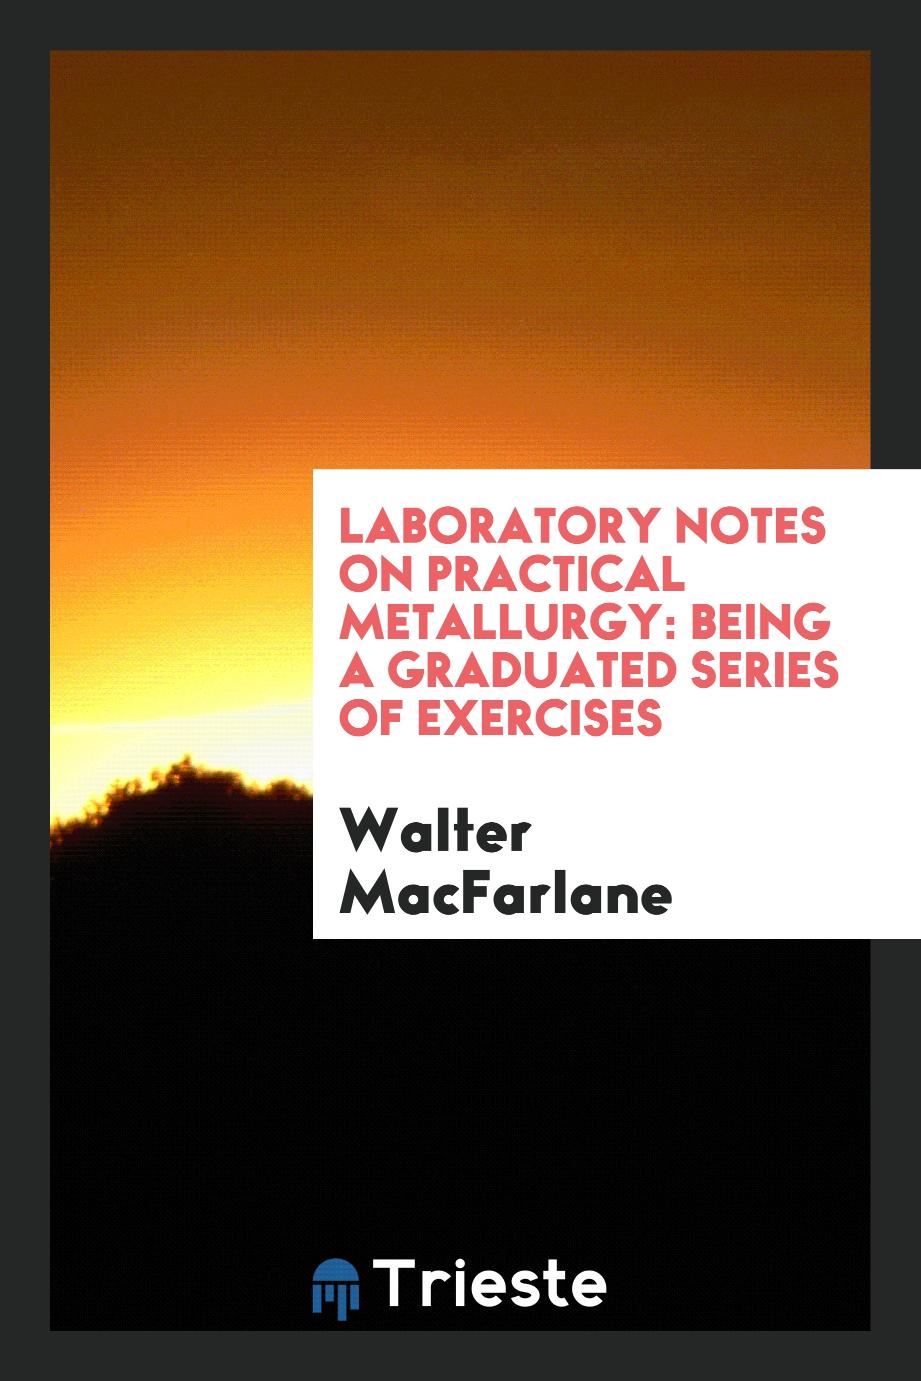 Laboratory Notes on Practical Metallurgy: Being a Graduated Series of Exercises